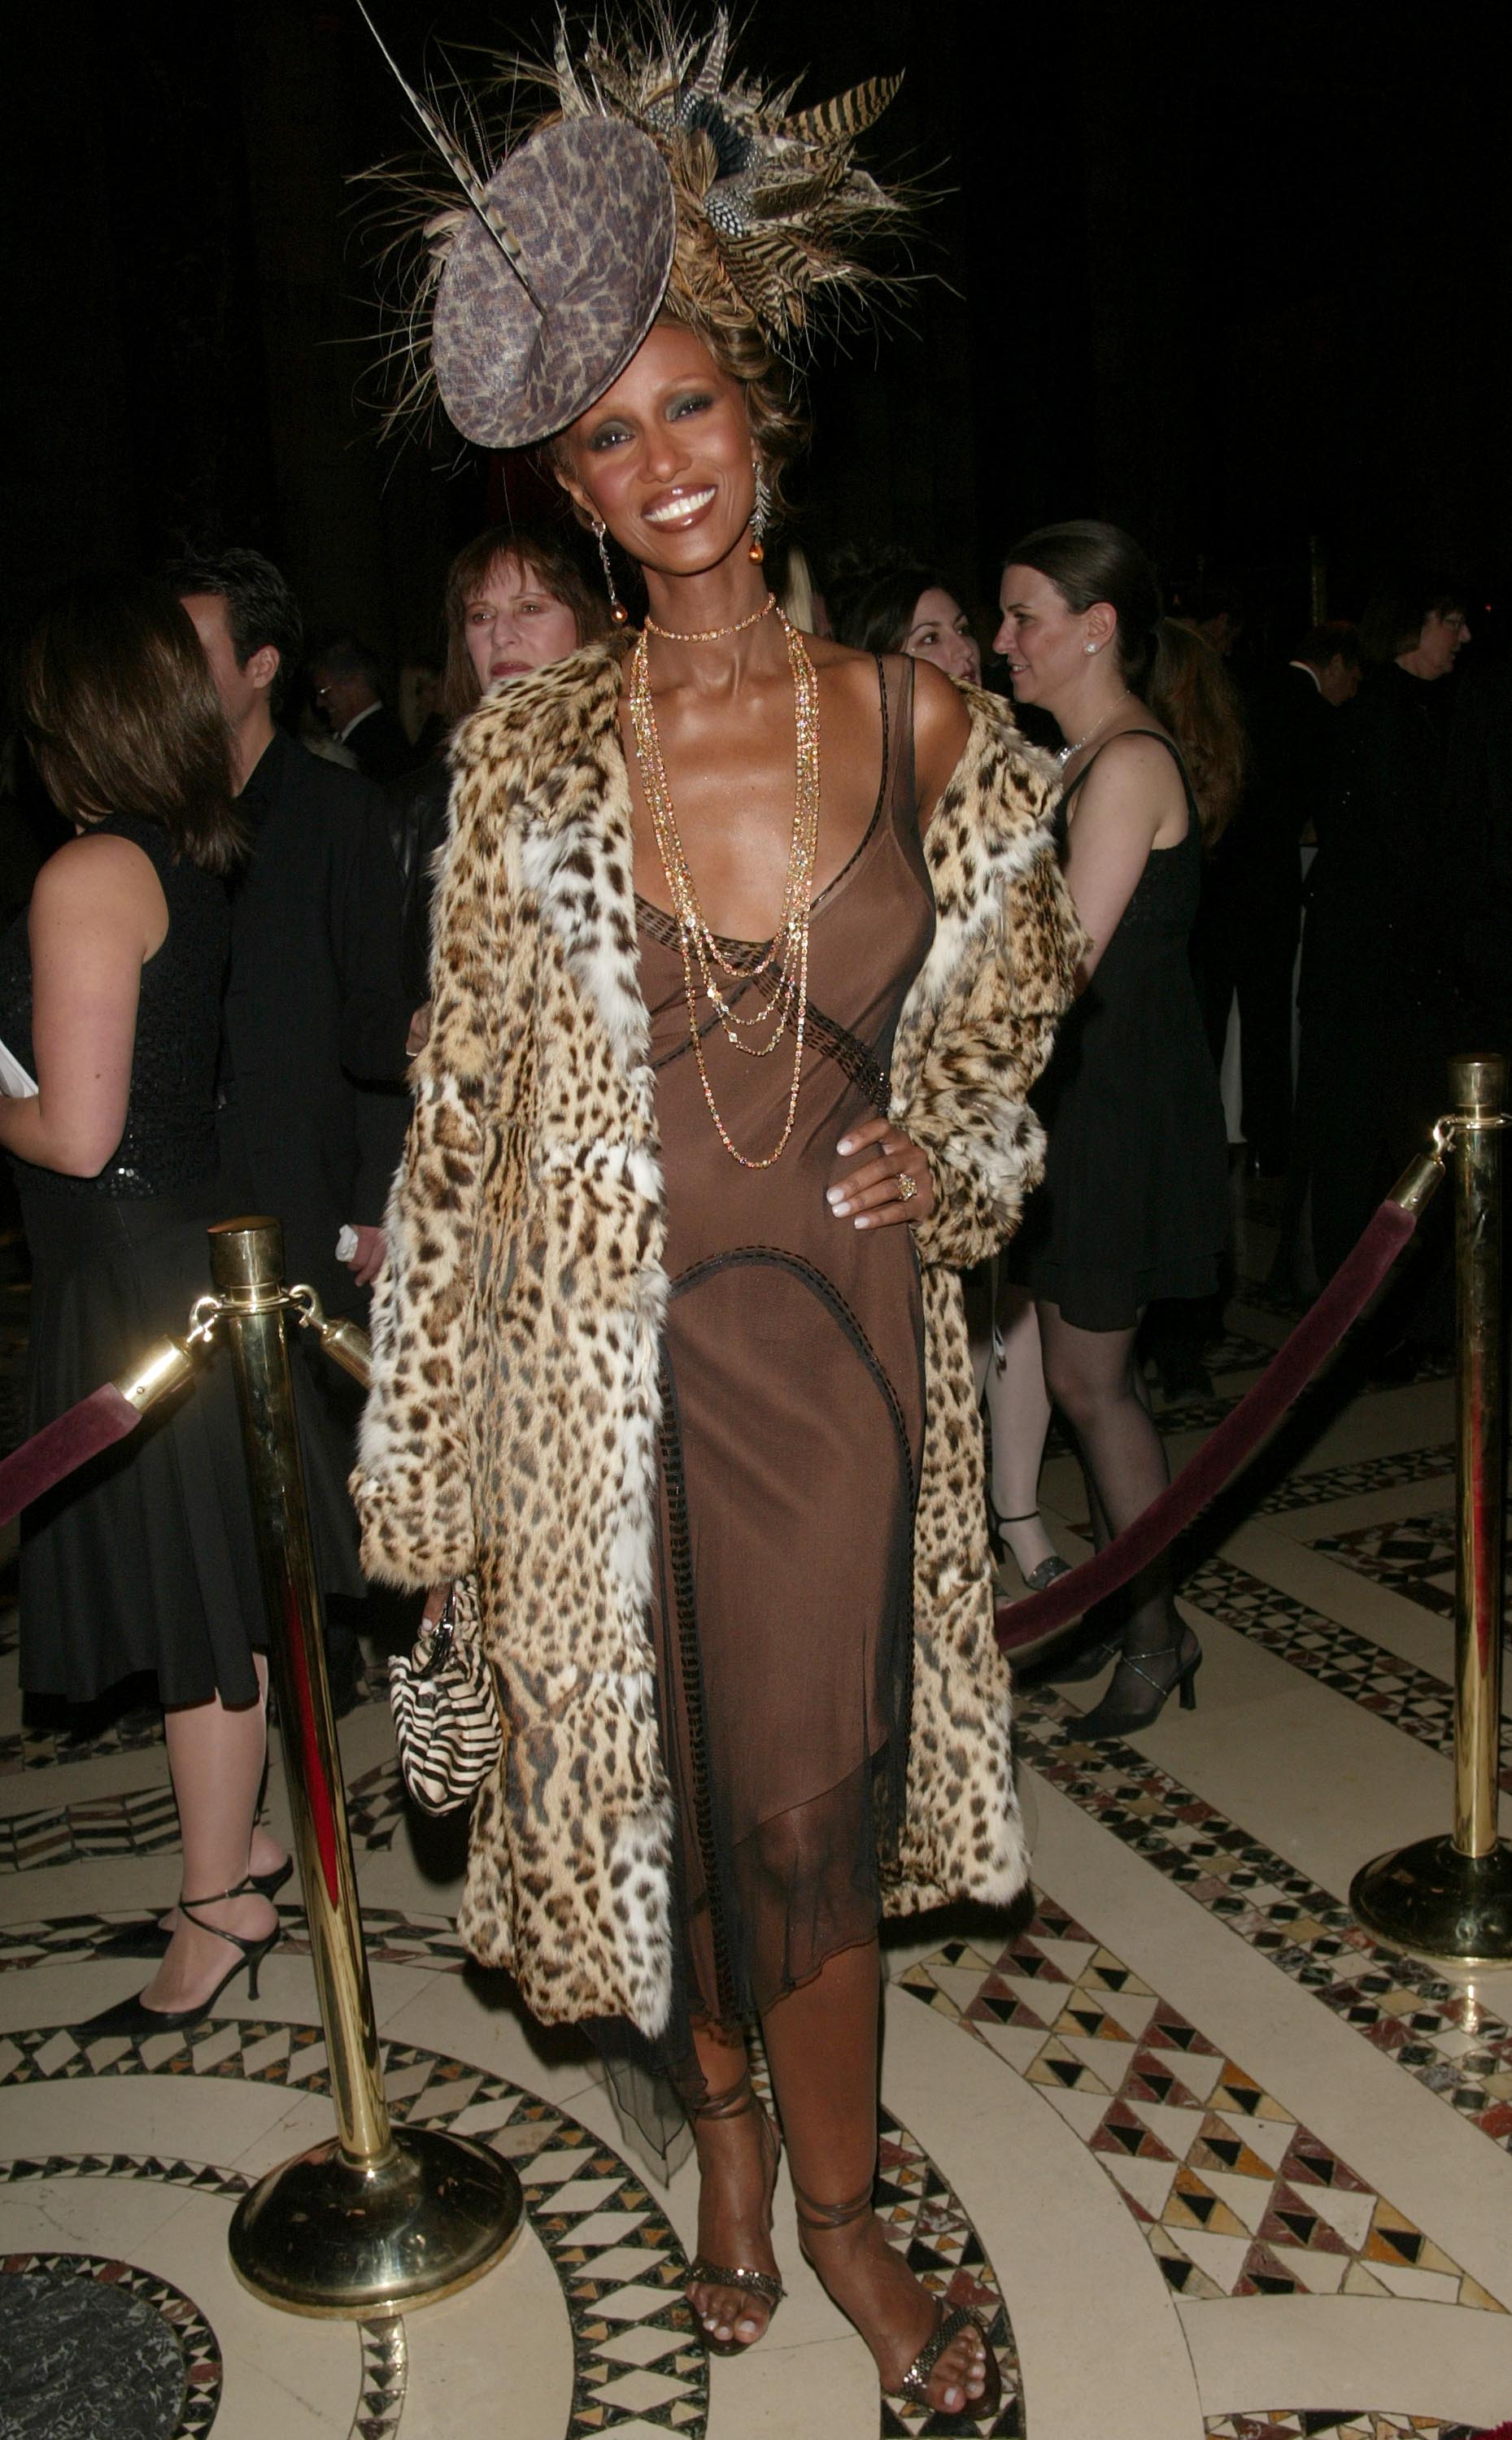 Iconic party looks: Iman wearing a leopard print dress